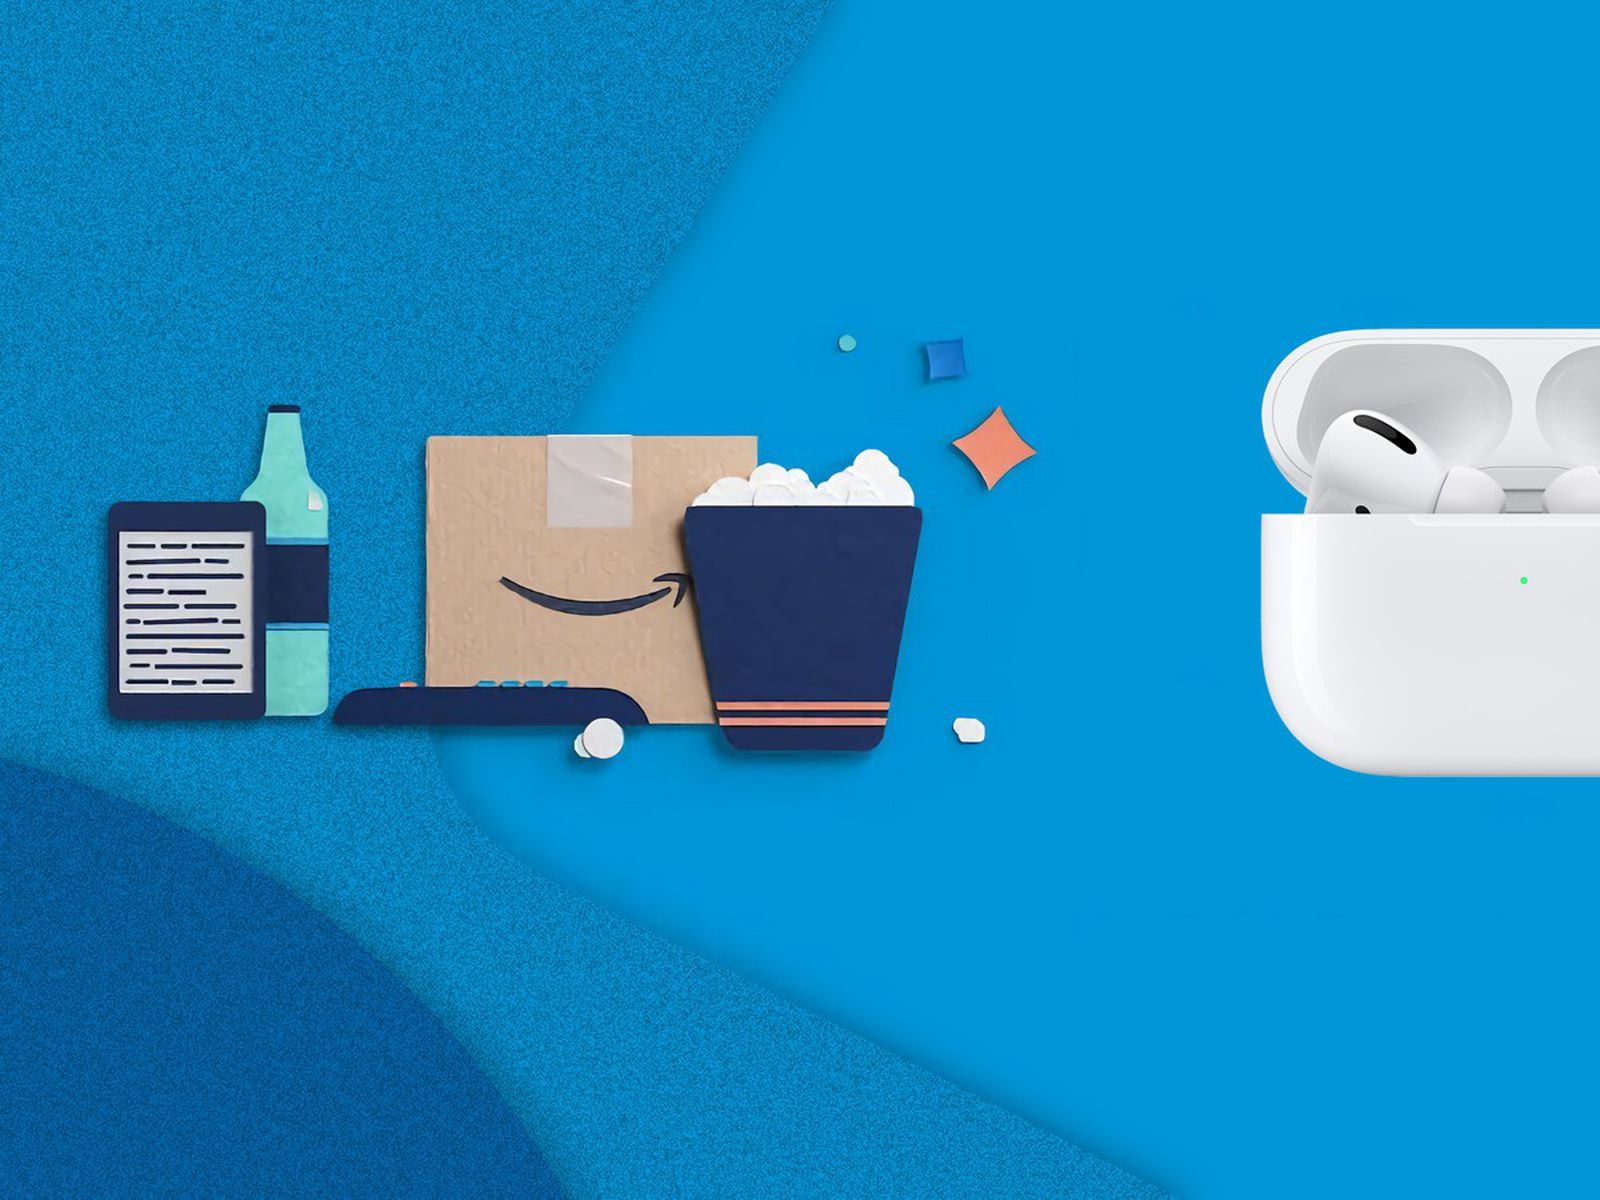 Amazon Prime Day Get Airpods For 119 00 And Airpods Pro For 1 99 Macrumors